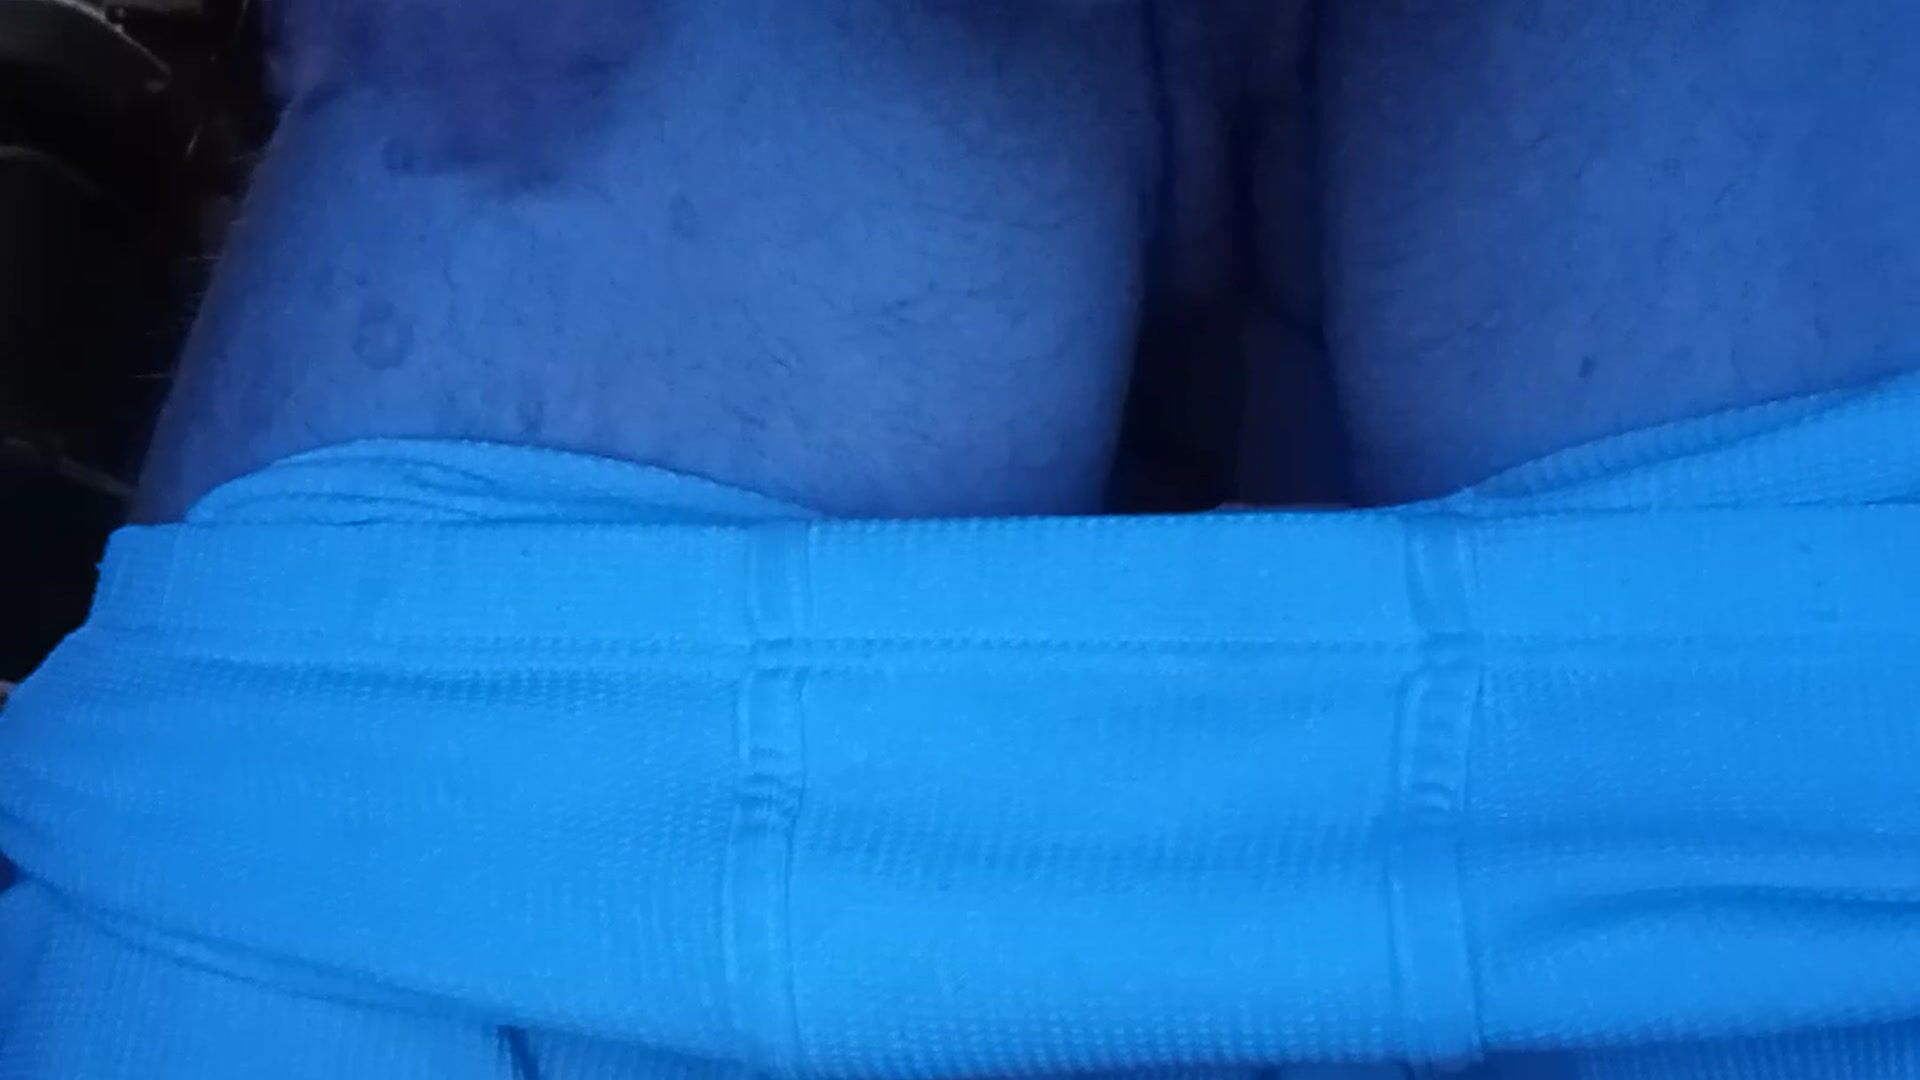 New longjohns with thick hard cock hanging out